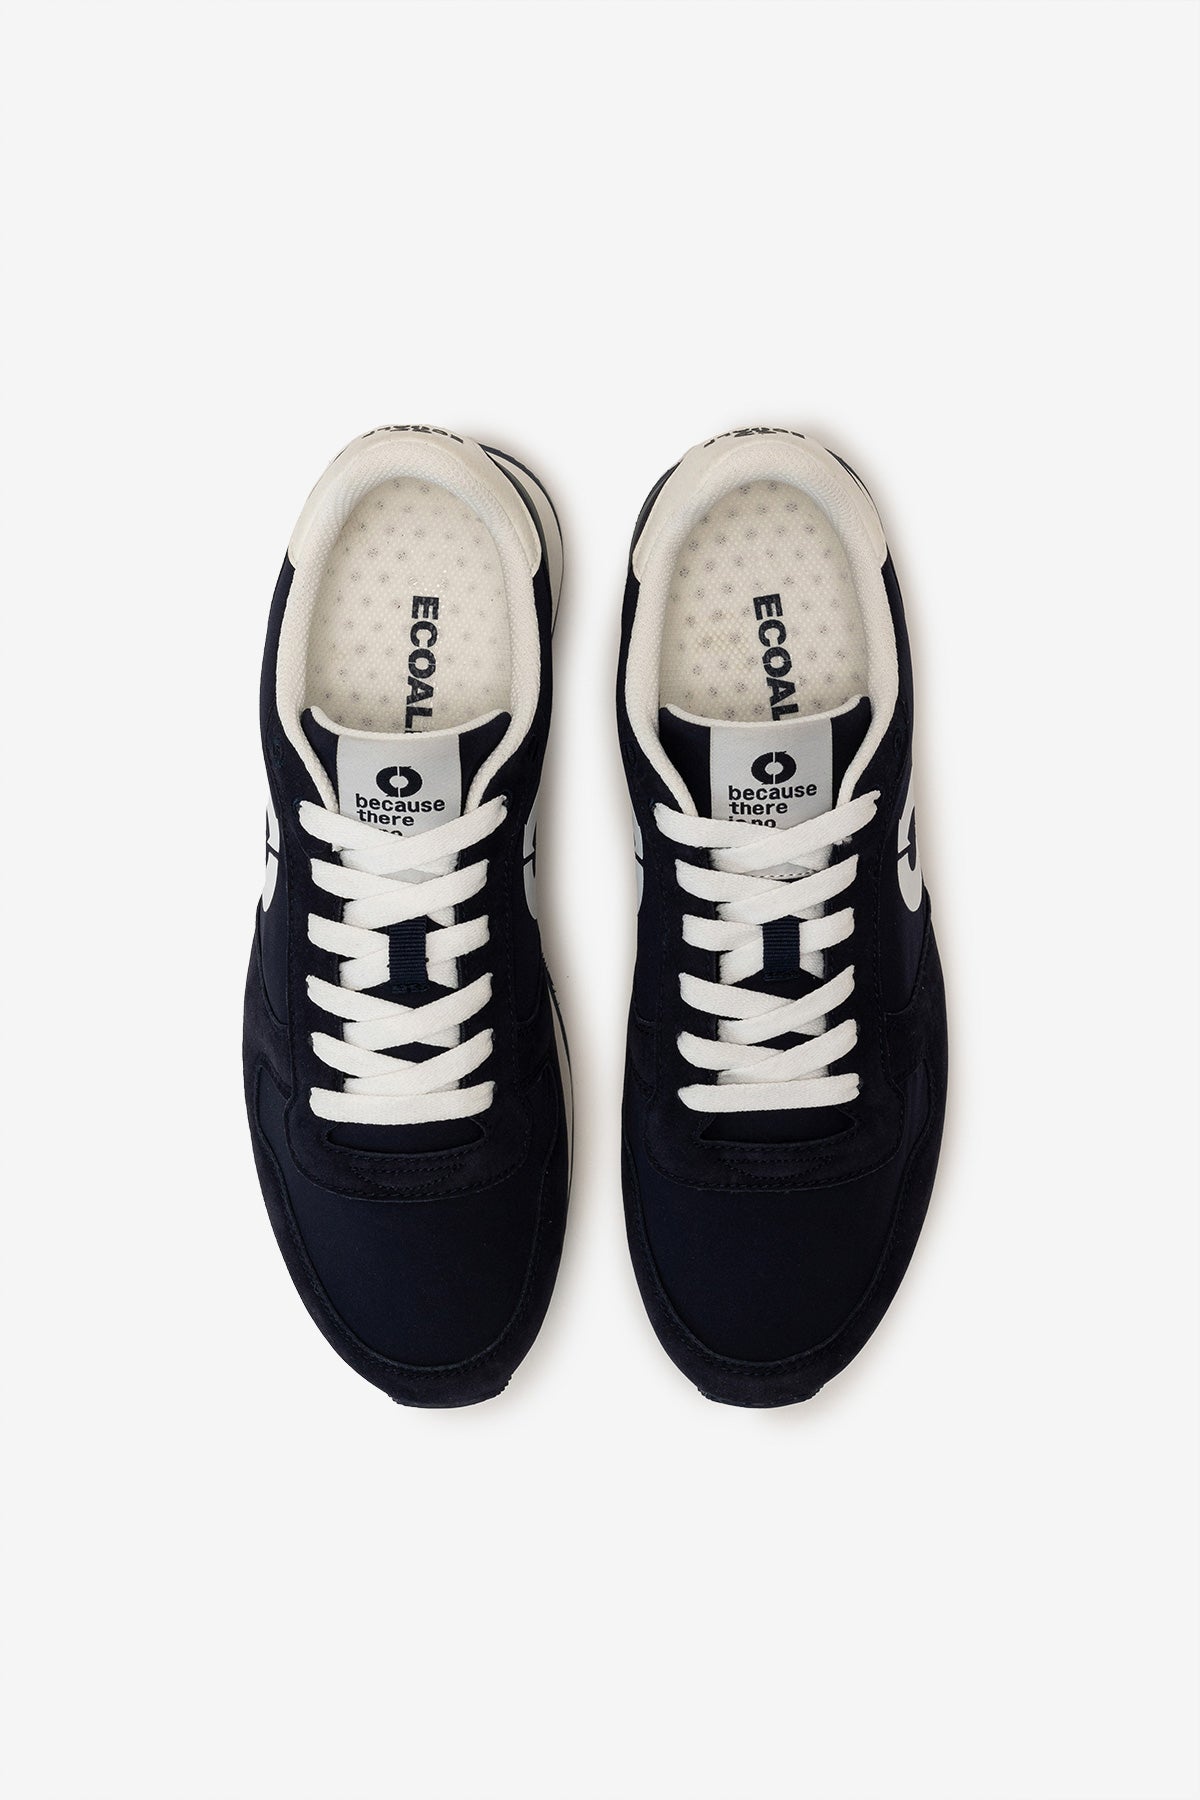 NAVY BLUE UCLA TRAINERS